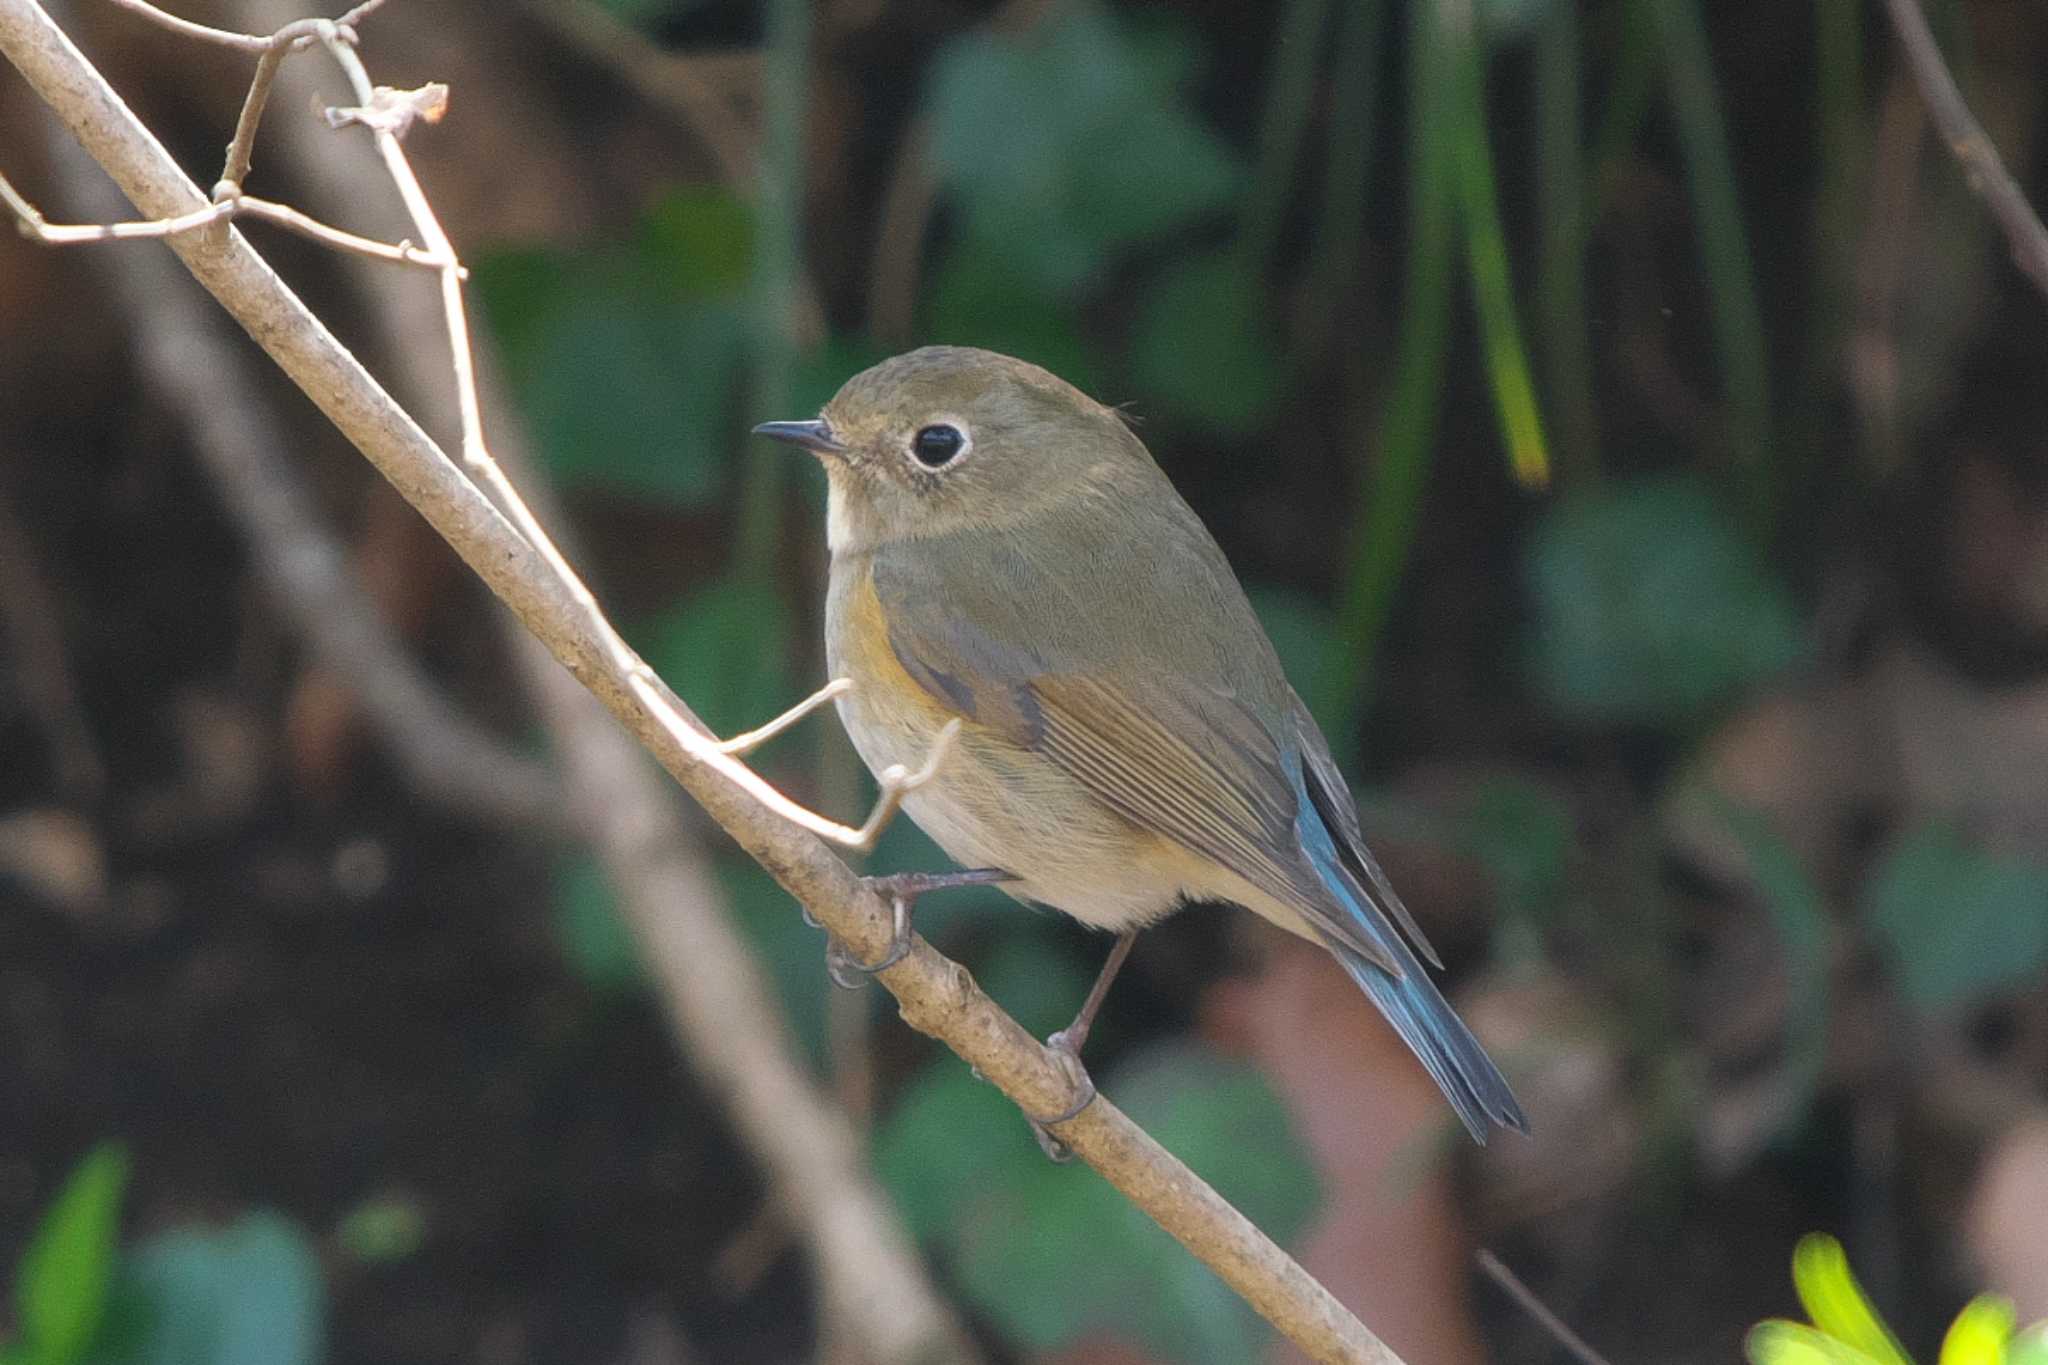 Photo of Red-flanked Bluetail at Kodomo Shizen Park by Y. Watanabe